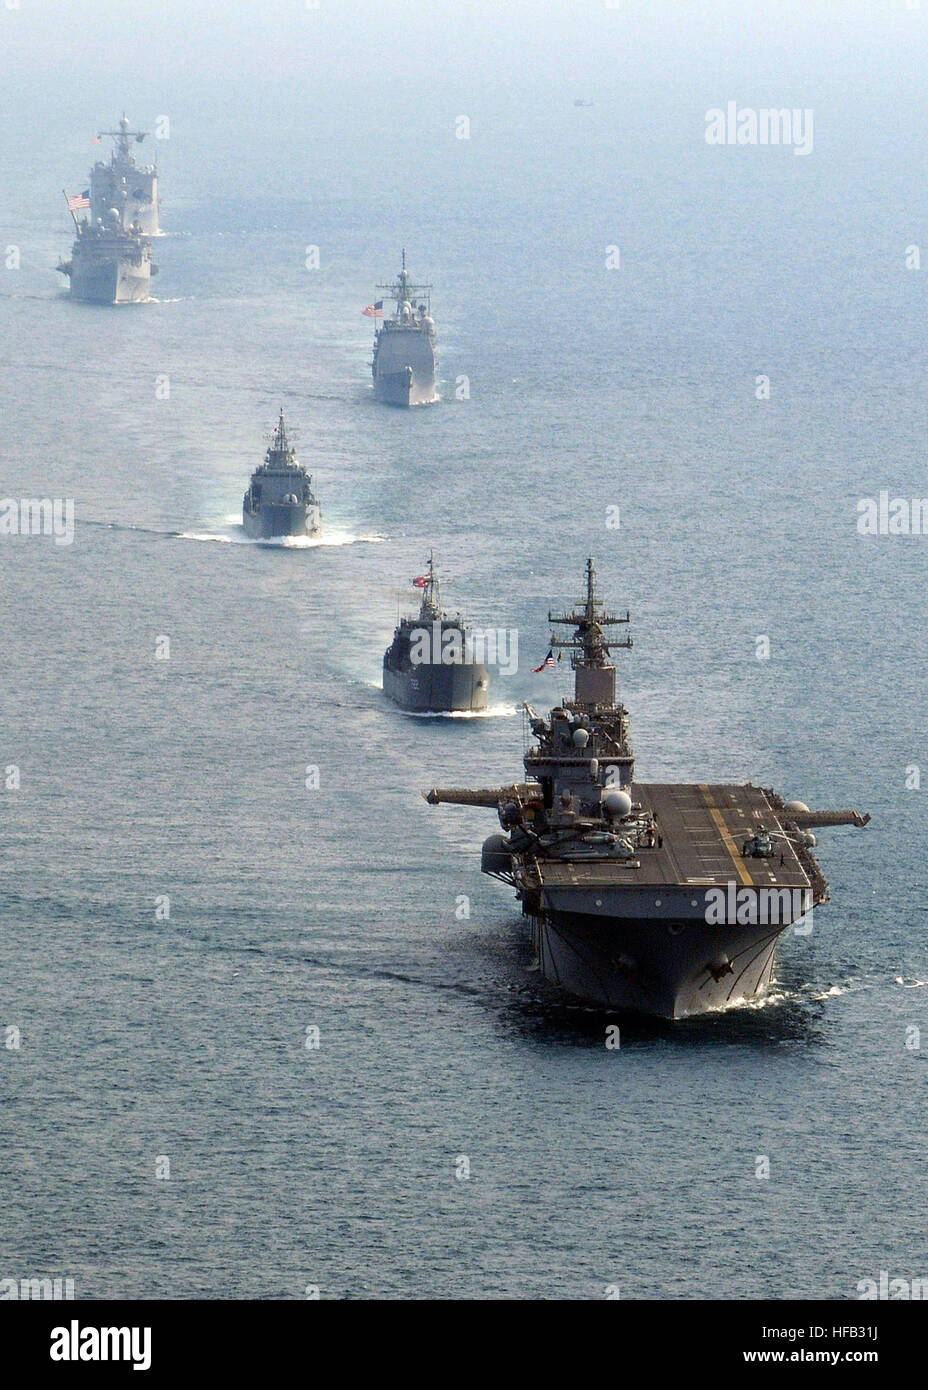 The forward-deployed amphibious assault ship USS Essex (LHD 2), the Royal Thai navy medium landing ship HTMS Surin (LST 722), the Republic of Korea navy tank landing ship Seongin Bong (LST 685), the Ticonderoga-class guided-missile cruiser USS Shiloh (CG 67), the forward-deployed amphibious dock landing ship USS Harpers Ferry (LSD 49) and the forward-deployed amphibious transport dock ship USS Denver (LPD 9), transit in formation in the Gulf of Thailand during exercise Cobra Gold 2010. Cobra Gold 2010 252995 Stock Photo